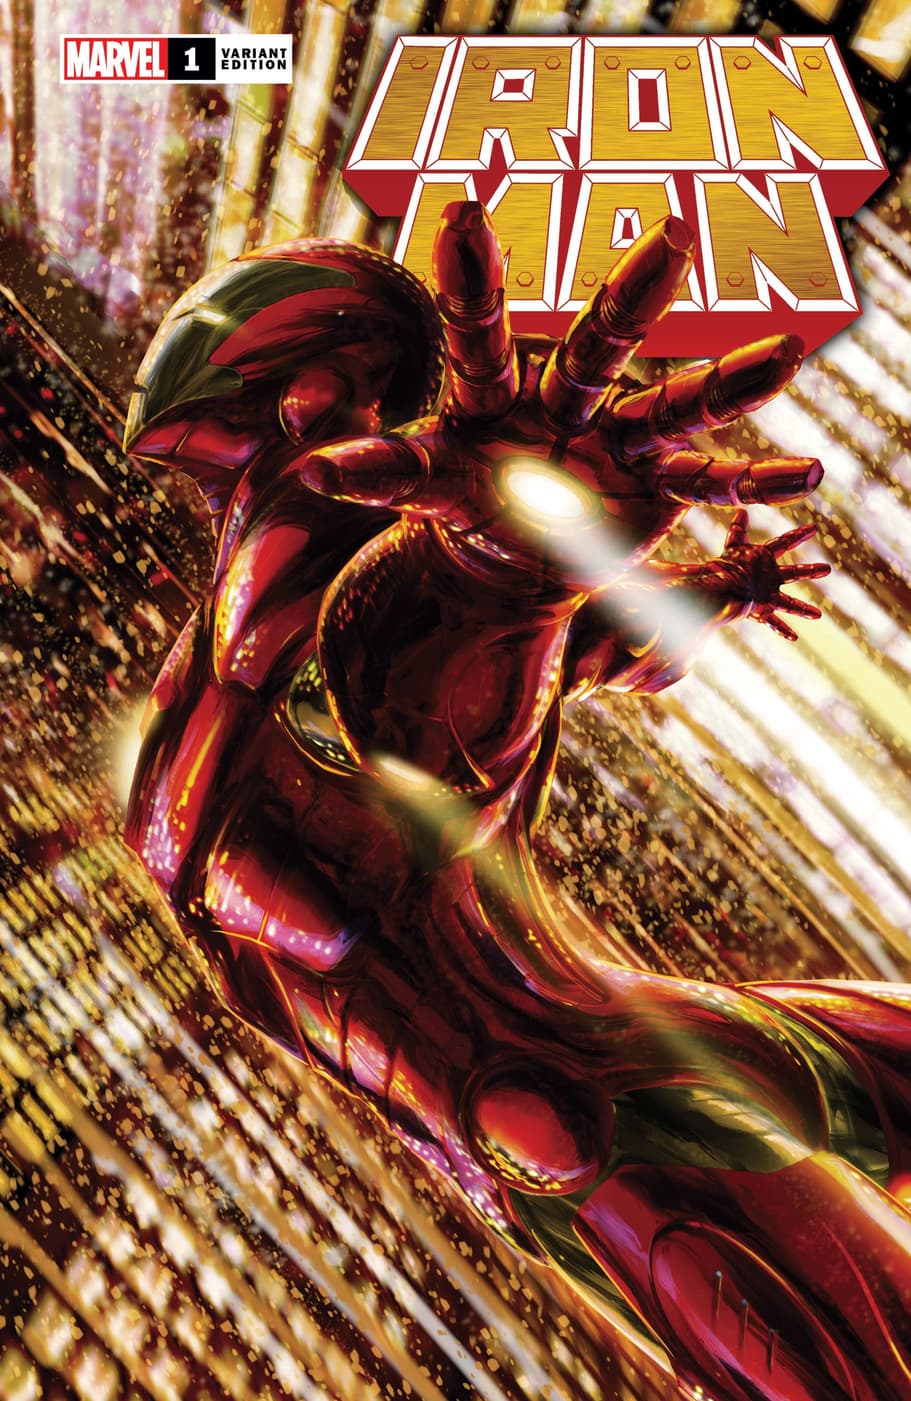 IRON MAN #1 variant cover by Tenjin